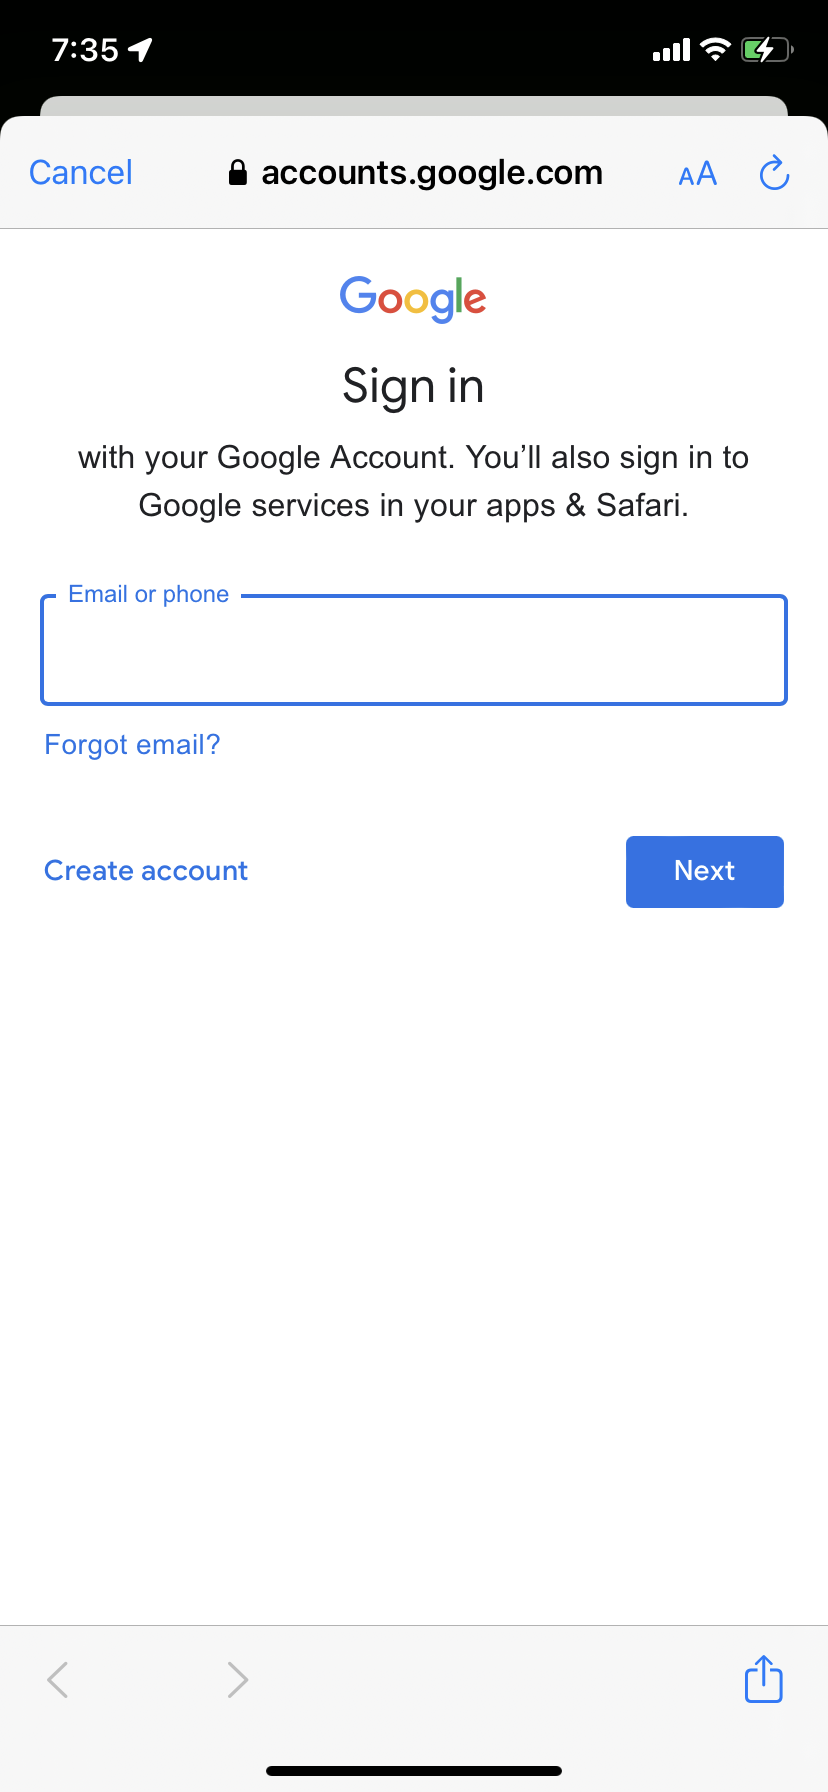 A page where the user can log into their Google account.